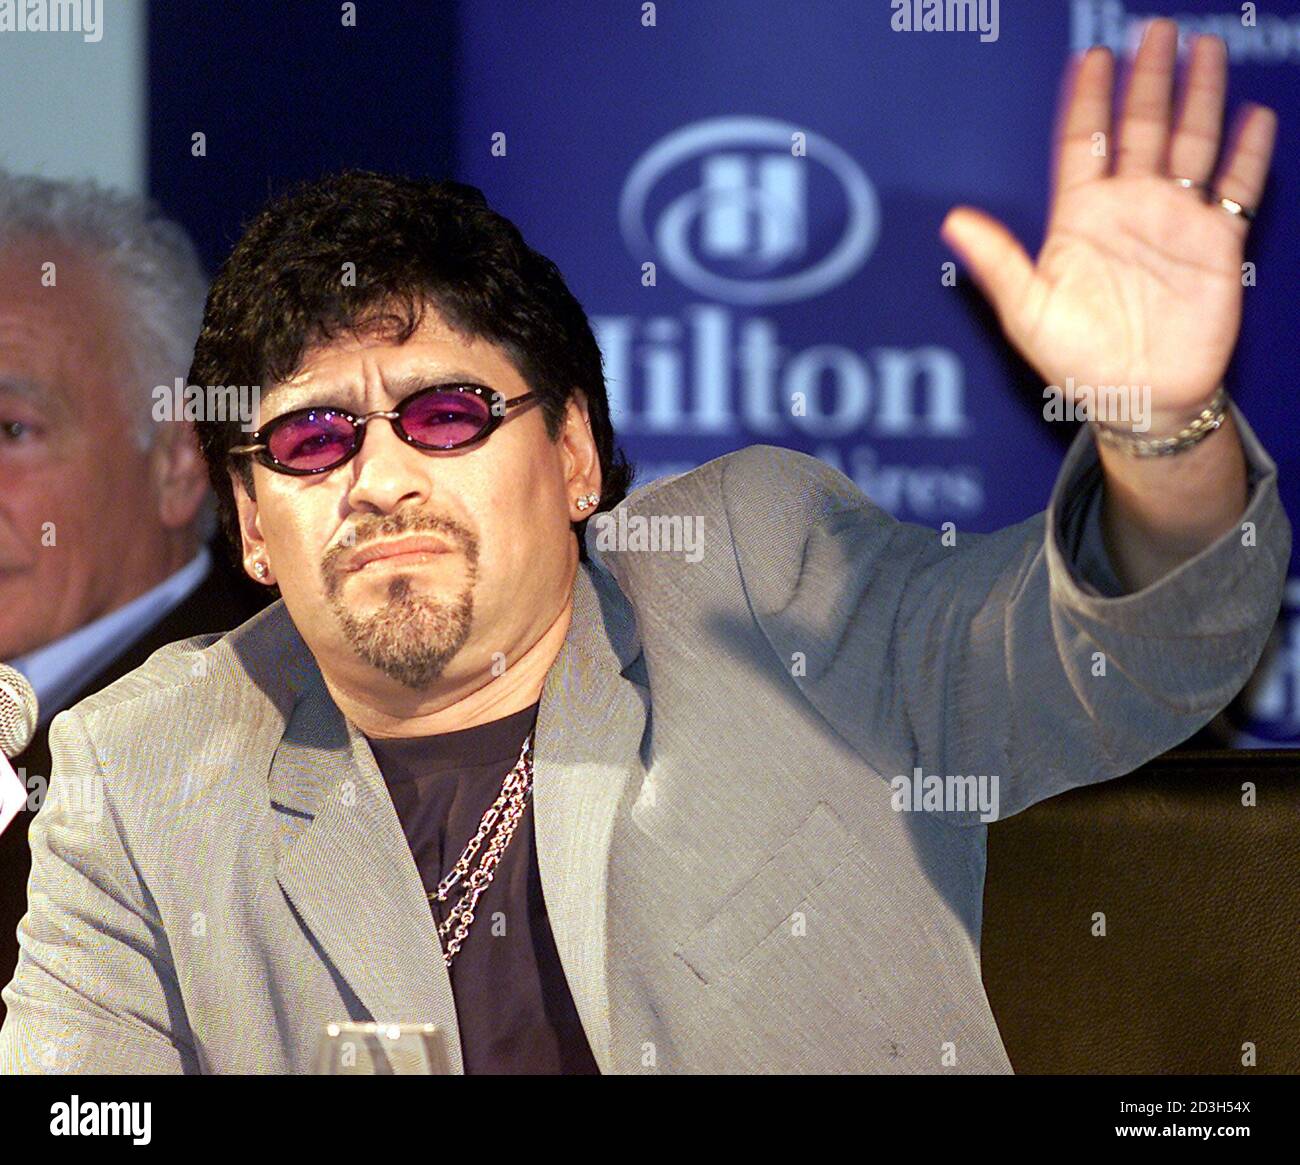 Argentine soccer legend Diego Maradona waves to photographers during a  press conference in Buenos Aires, November 6, 2001. Maradona gave details  of his November 10 testimonial game. Maradona, who is based in